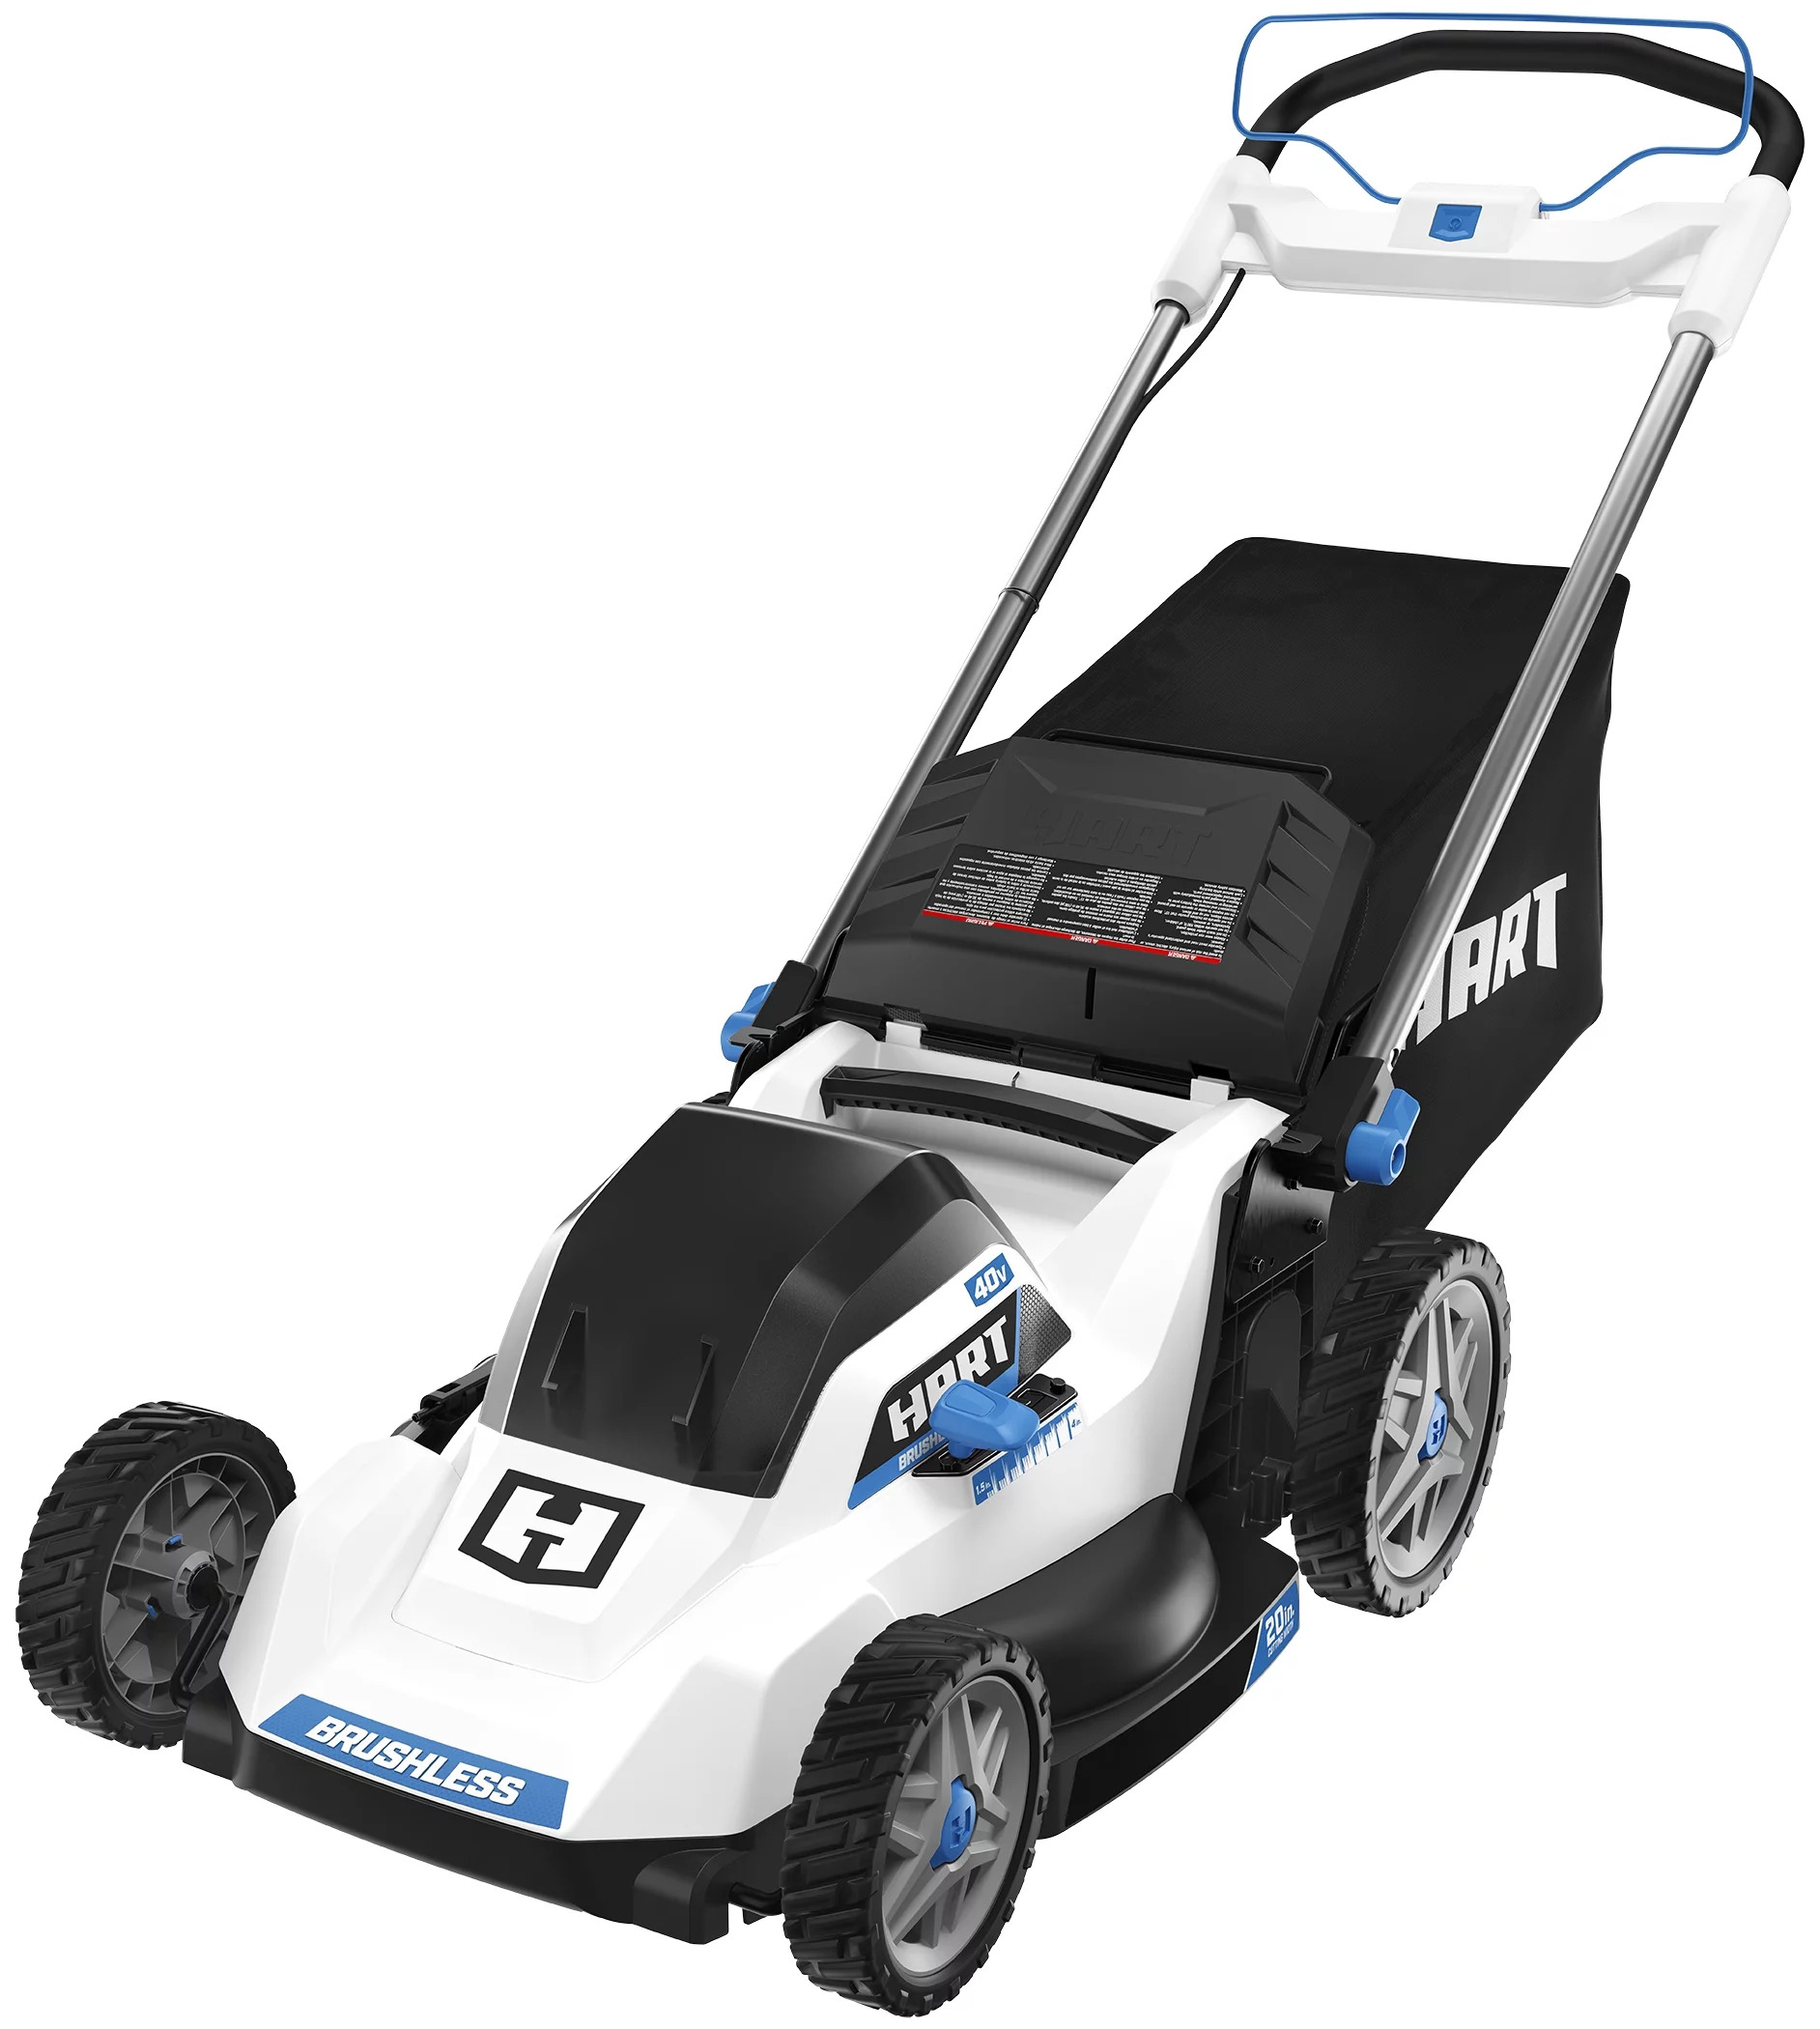 The mower, featuring four wheels, a push handle, and a white and blue color scheme